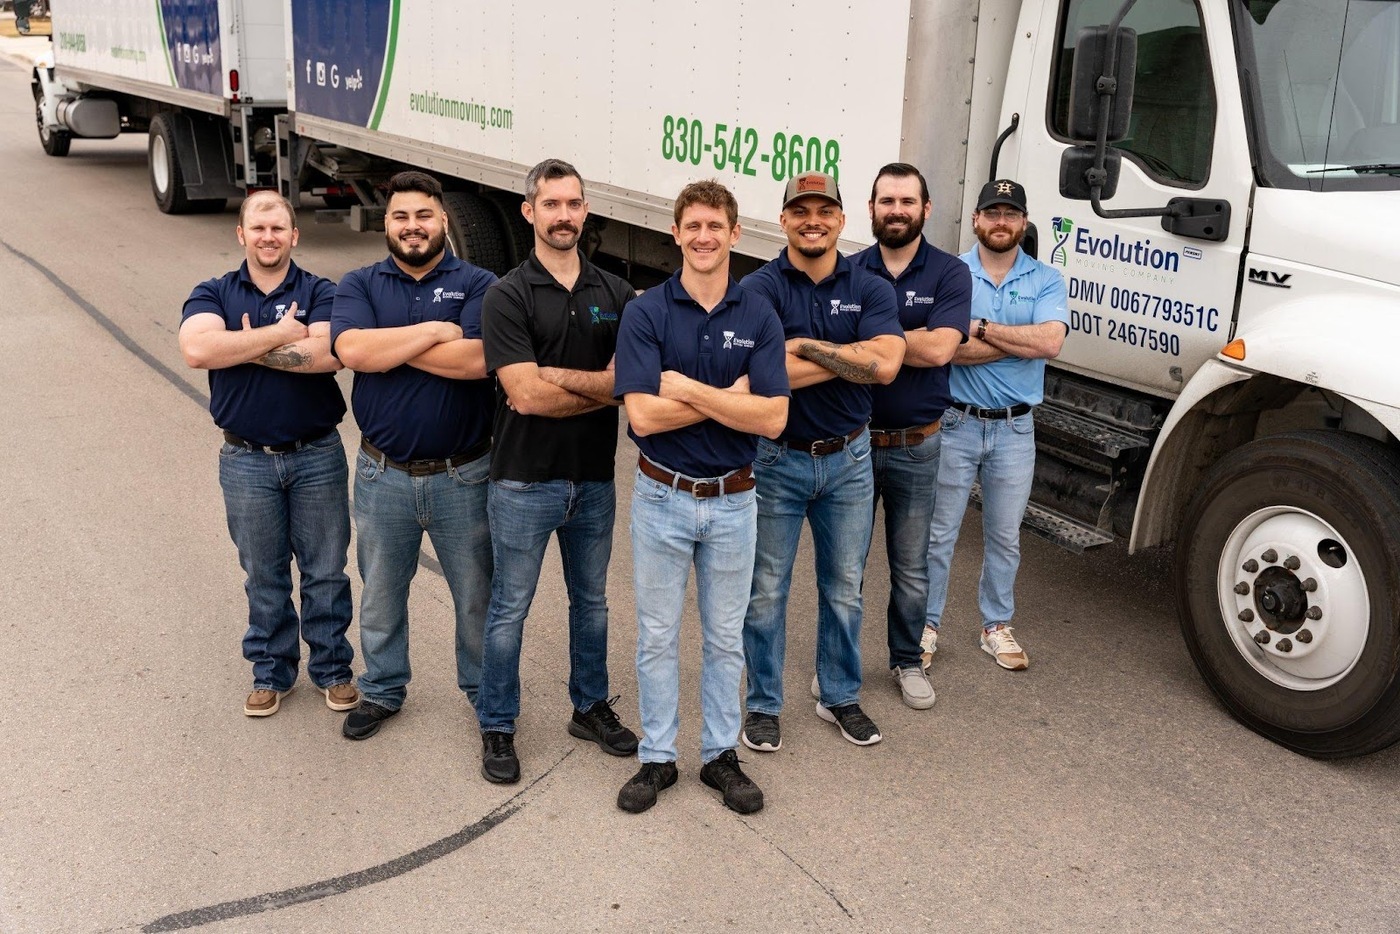 The family-owned business in Dallas, TX, has become the go-to moving company for residential and commercial clients because of its top-notch services and solid customer support.